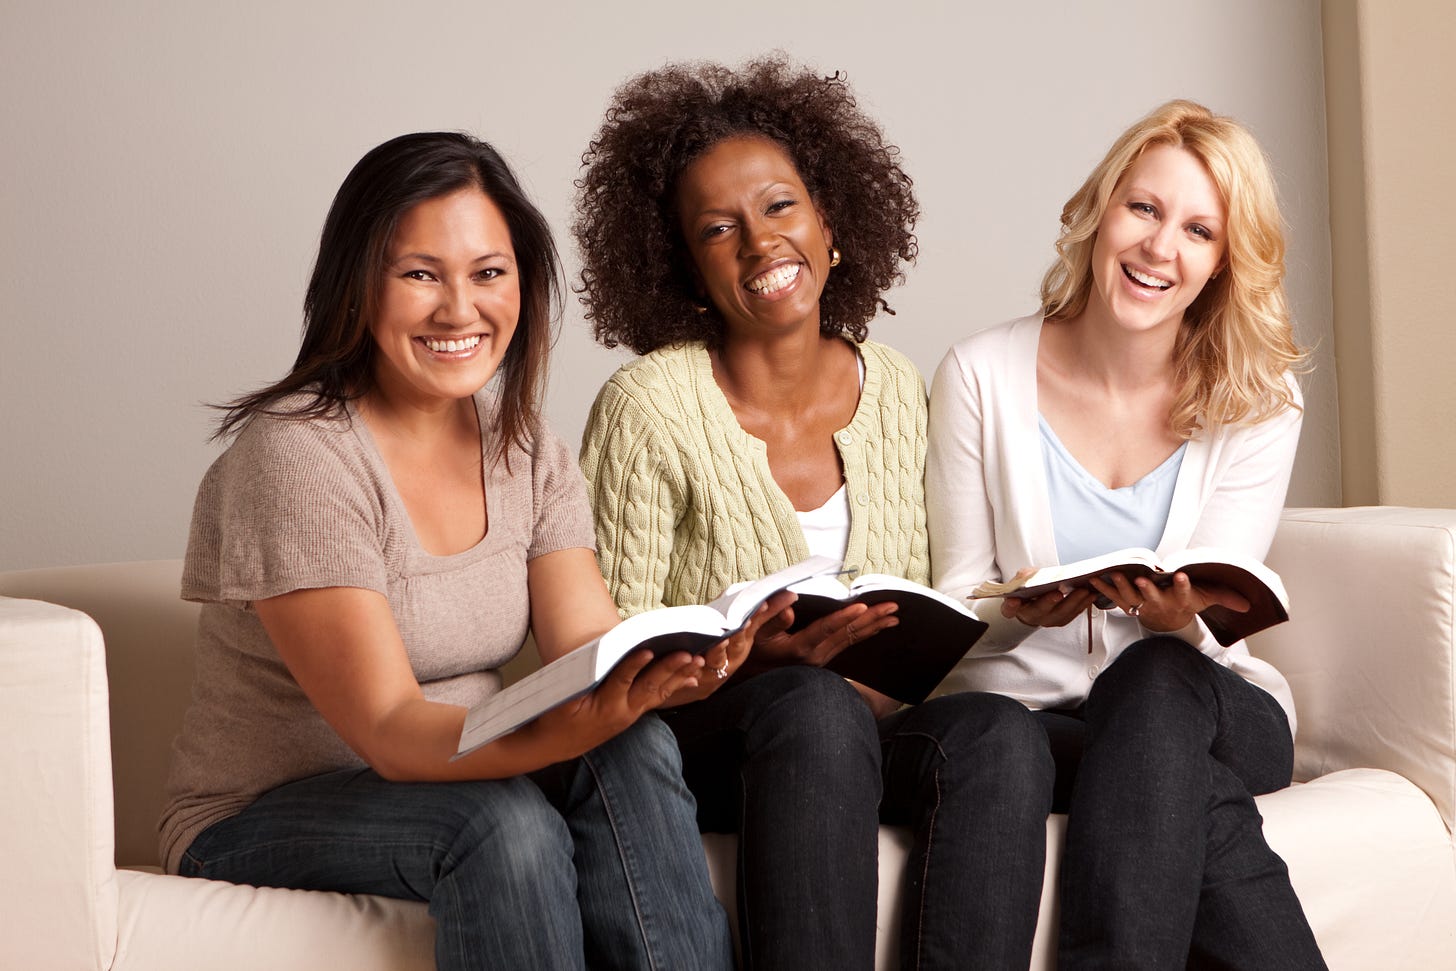 three smiling women sitting on a white coach all holding Bibles. They are from all different ethnicities, but they REALLY like the Bible